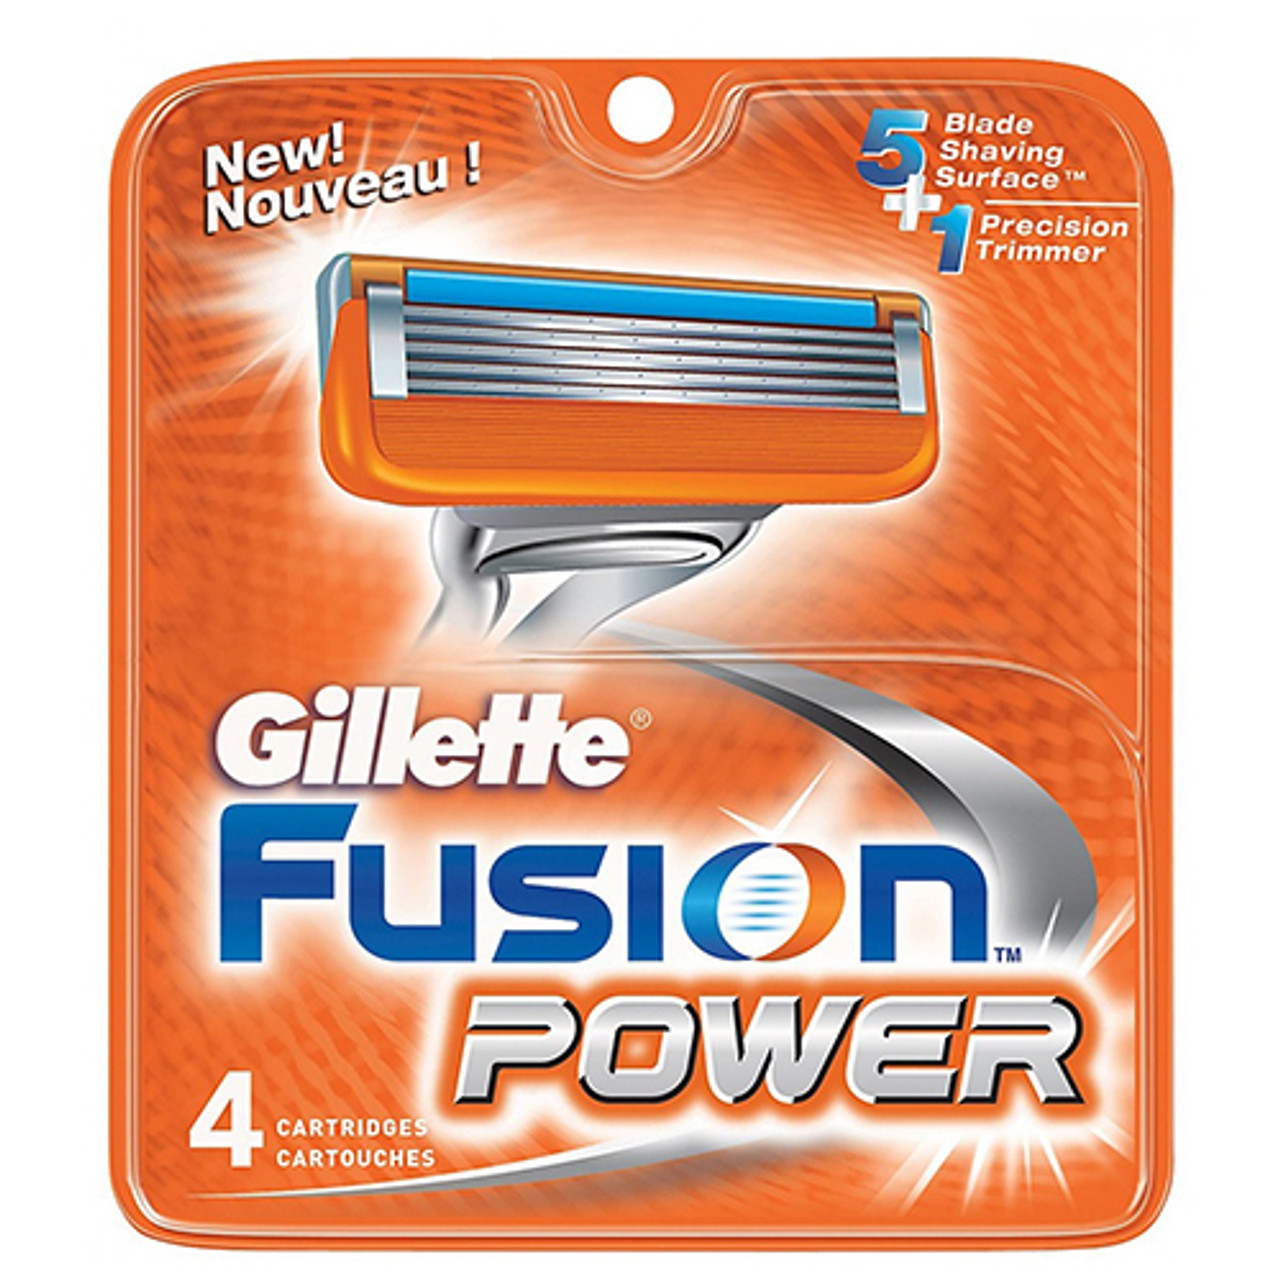 Gillette Fusion Catridges For The Power Razor Each, 5 in 1 Power Blades -